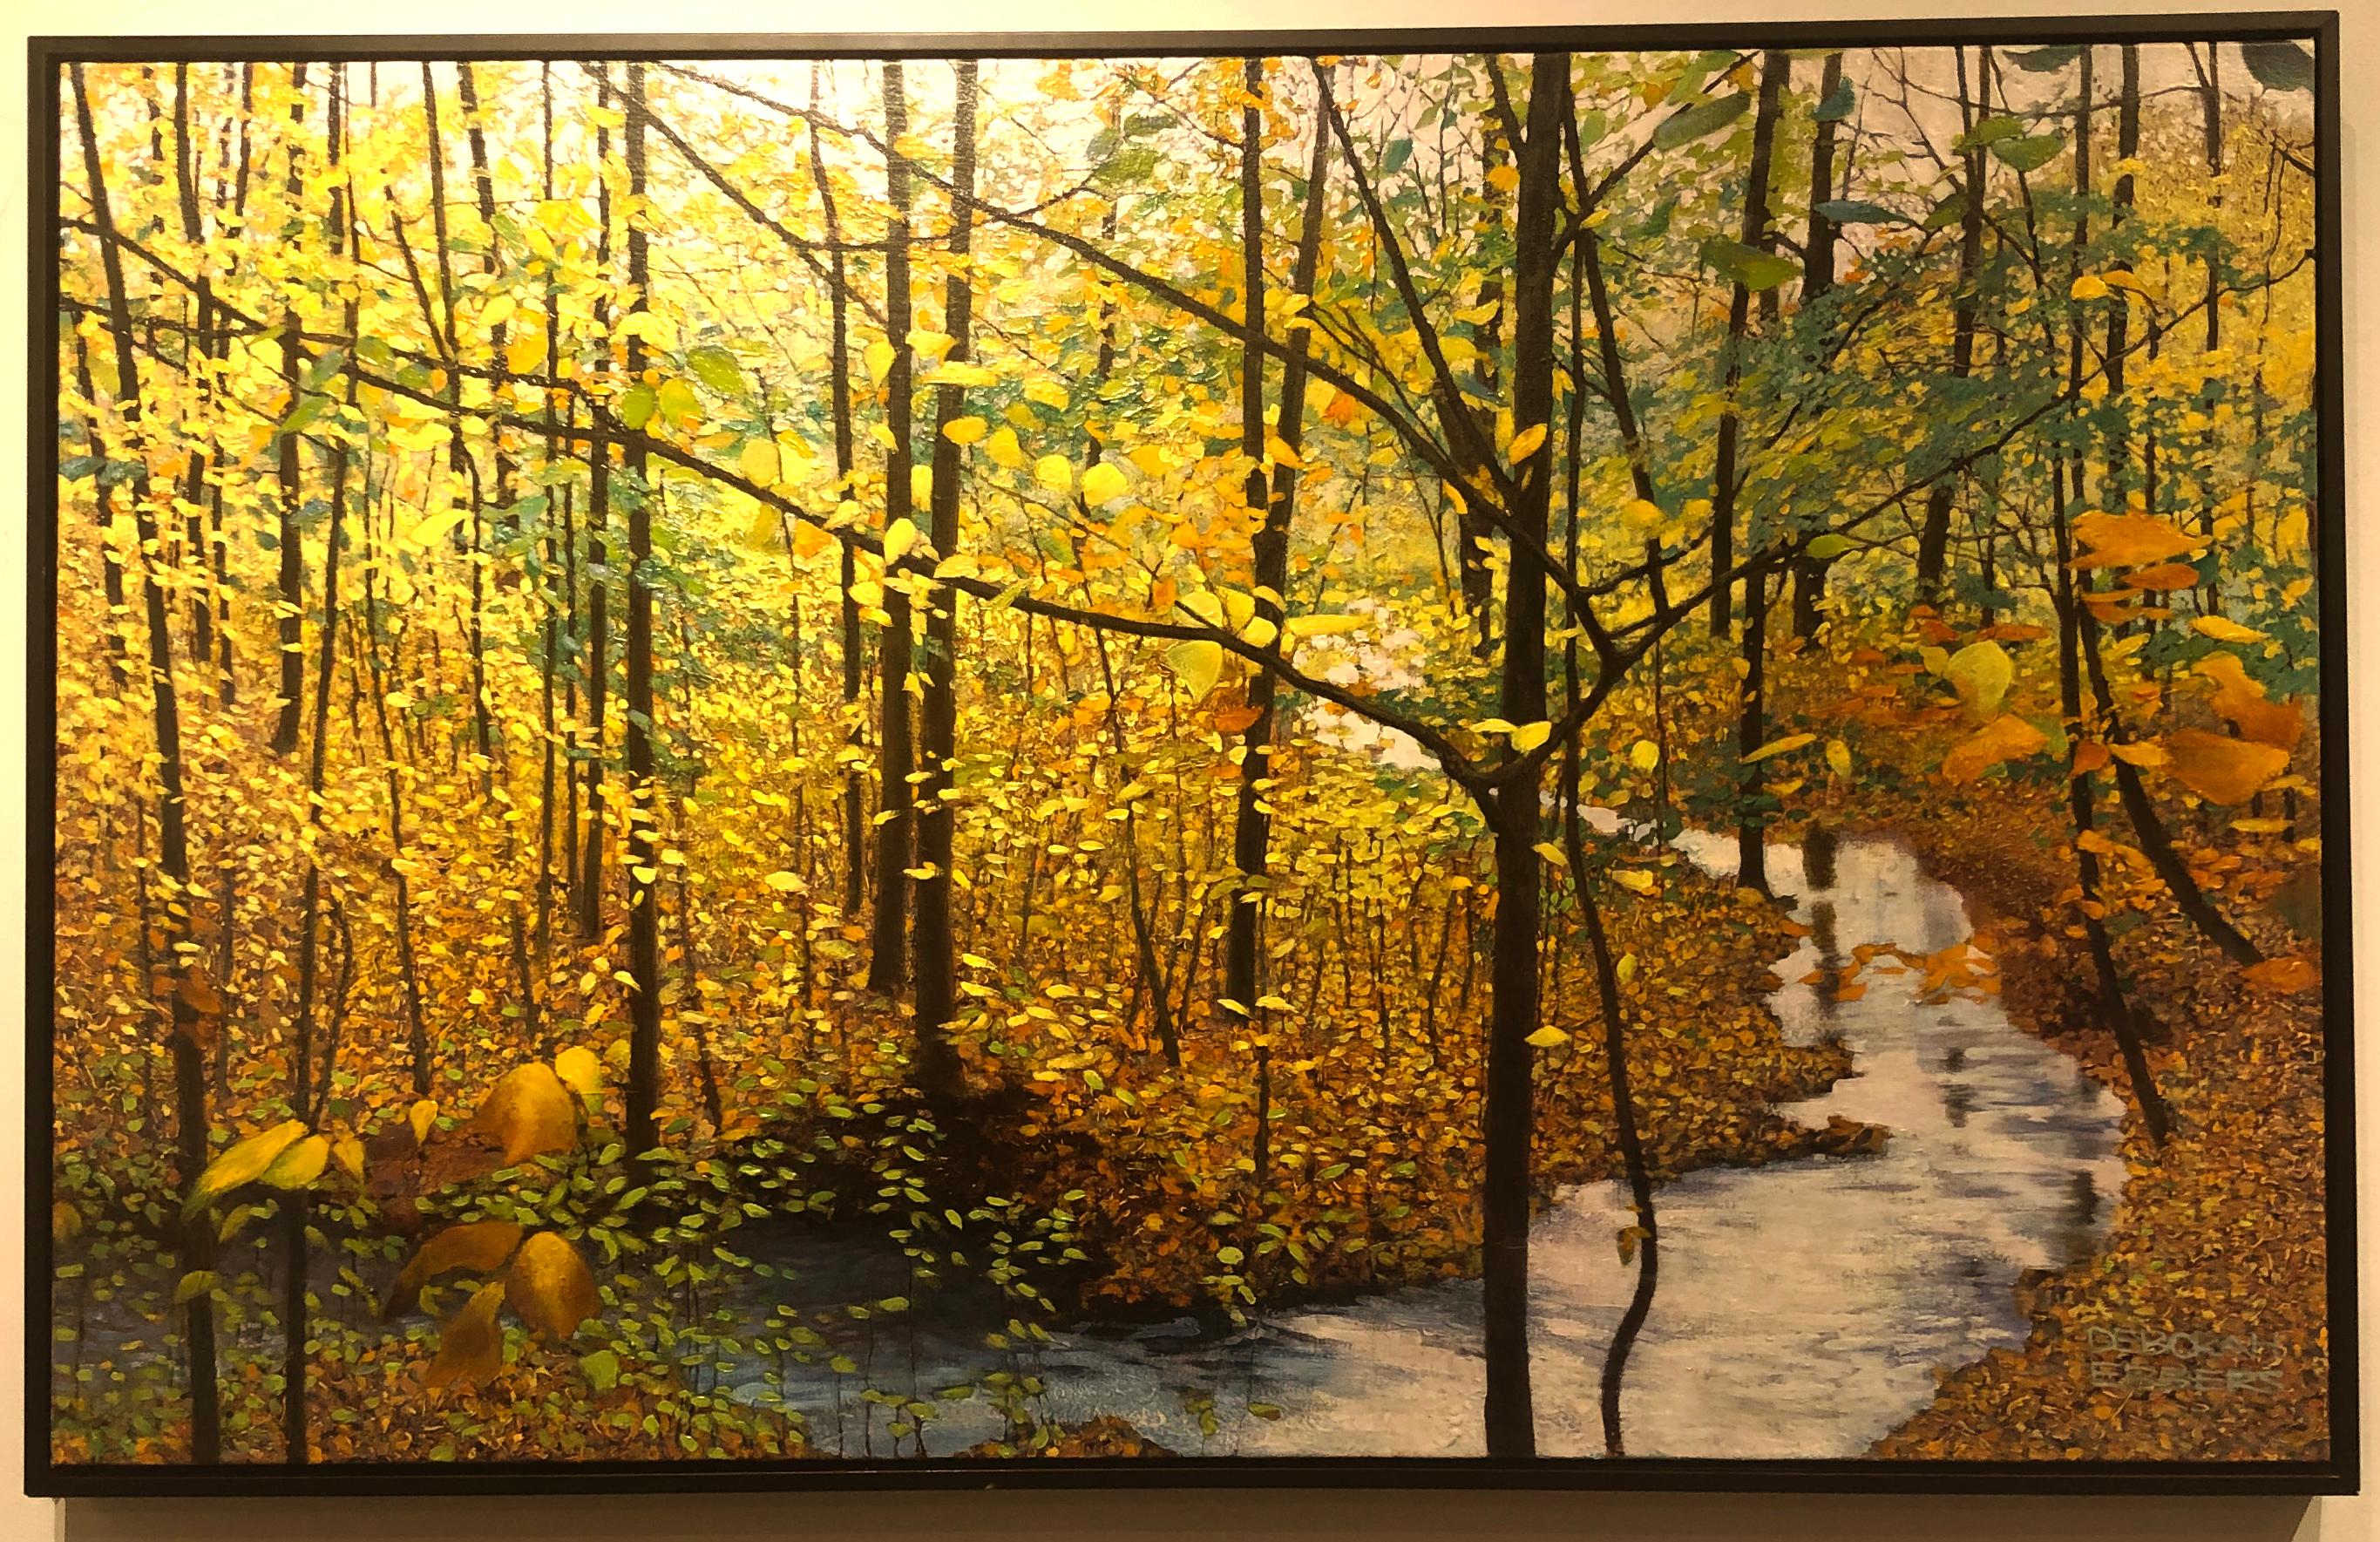 The Turning - Original Oil Painting of Stream and Trees with Leaf Covered Forest 1